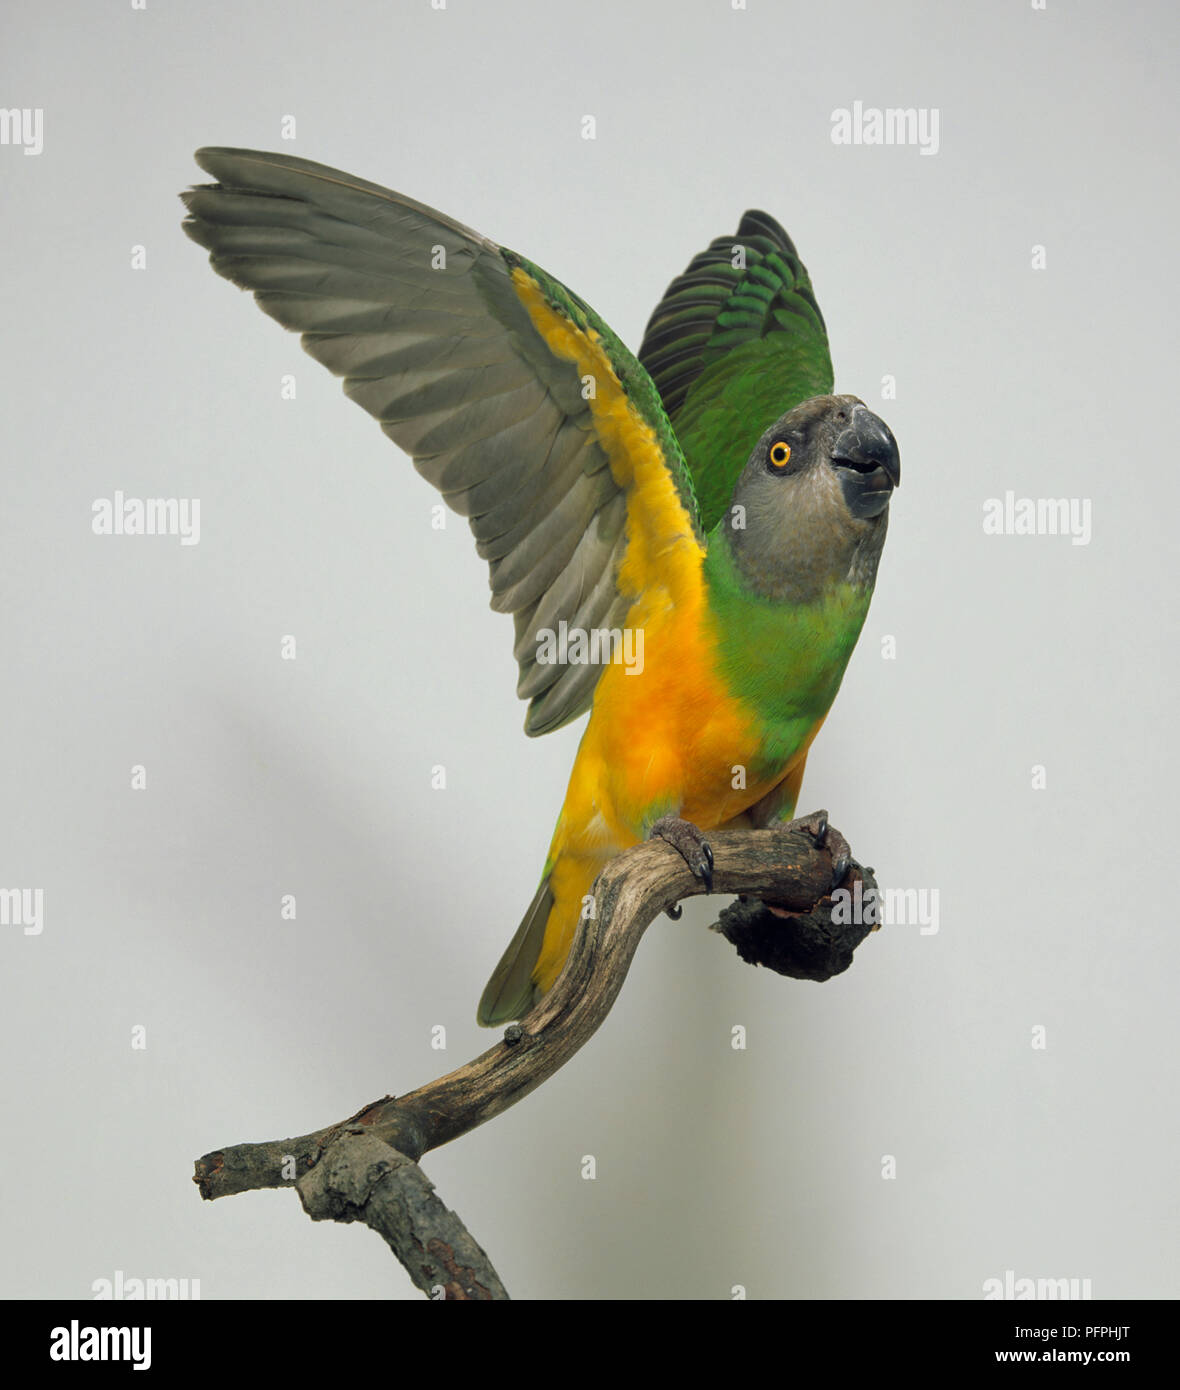 Senegal Parrot (Poicephalus senegalus) with spread wings, perching on branch Stock Photo